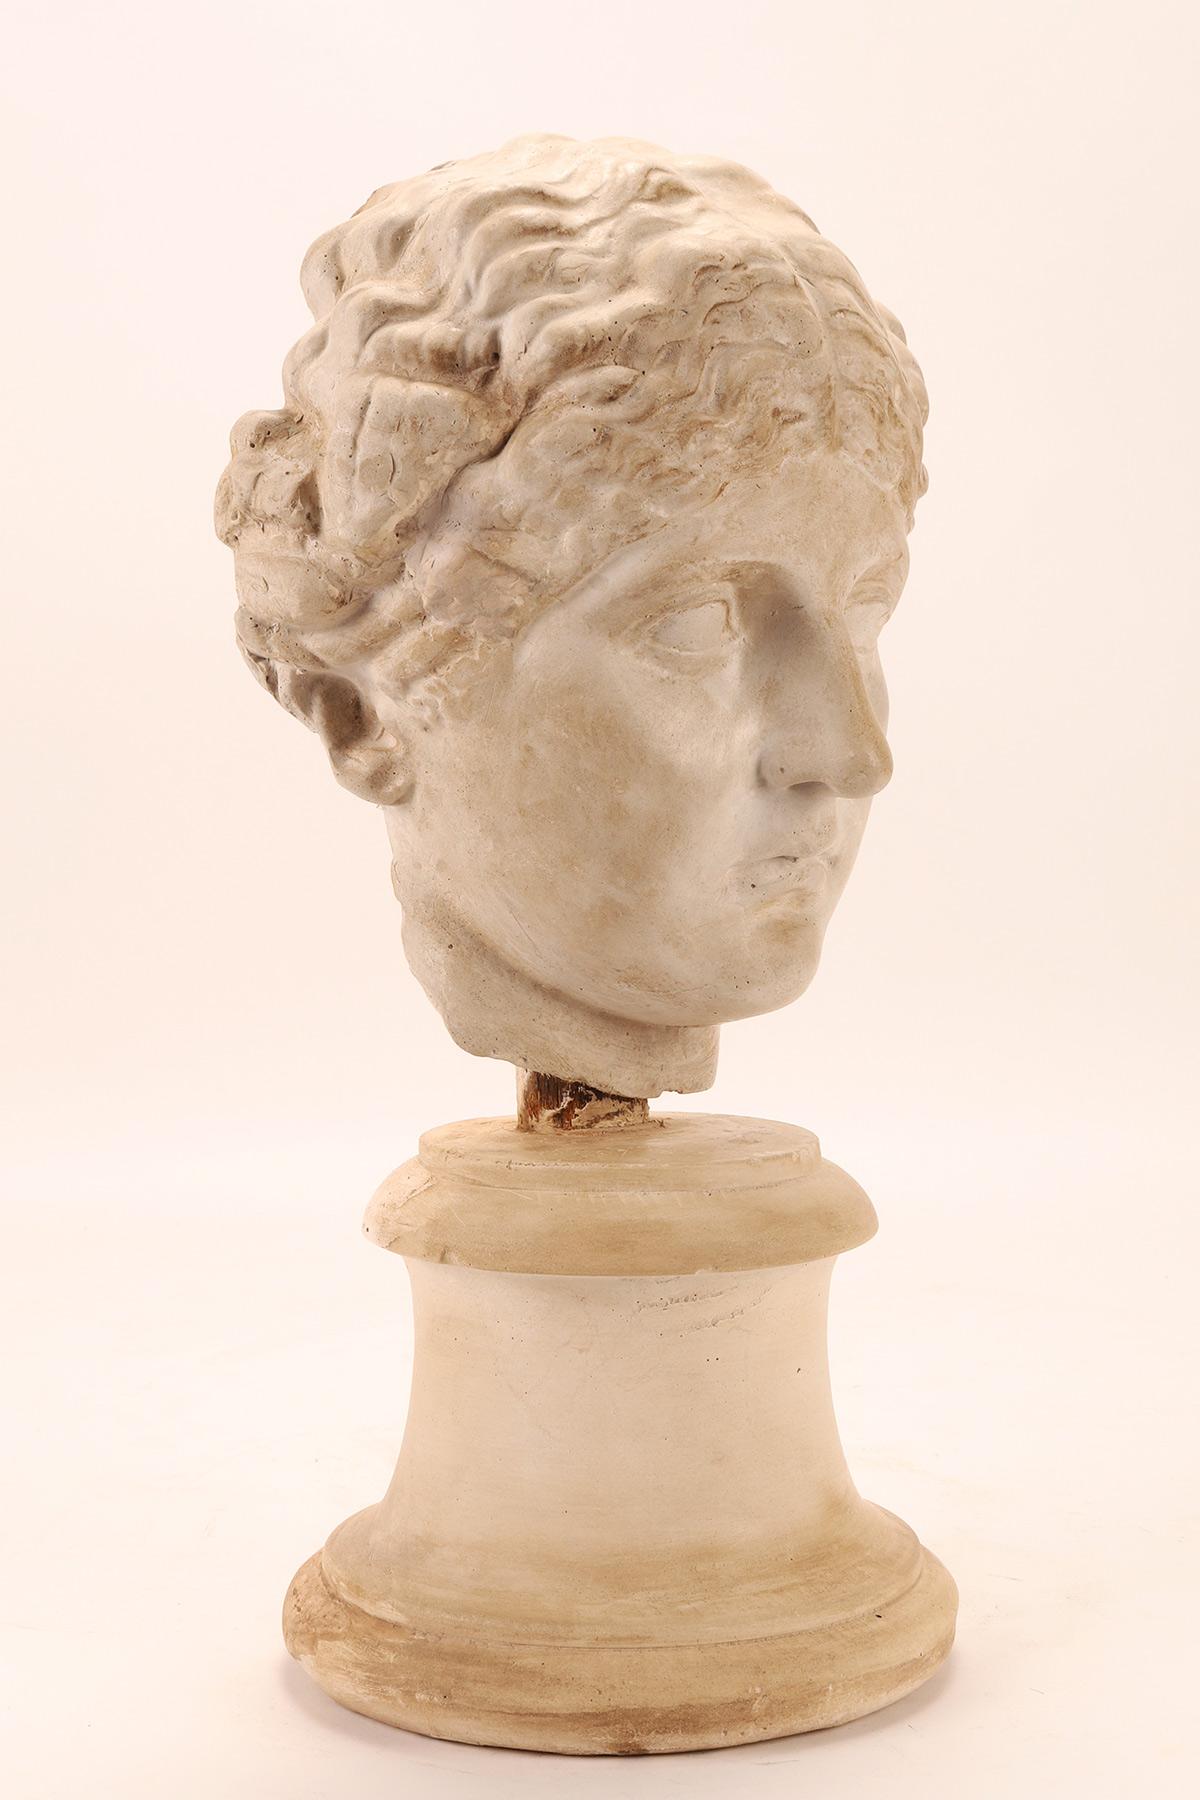 Above the plaster base, by means of a wooden support, the cast of the head of a Roman woman is set. Cast for the teaching drawing in the academy. Italy circa 1890.